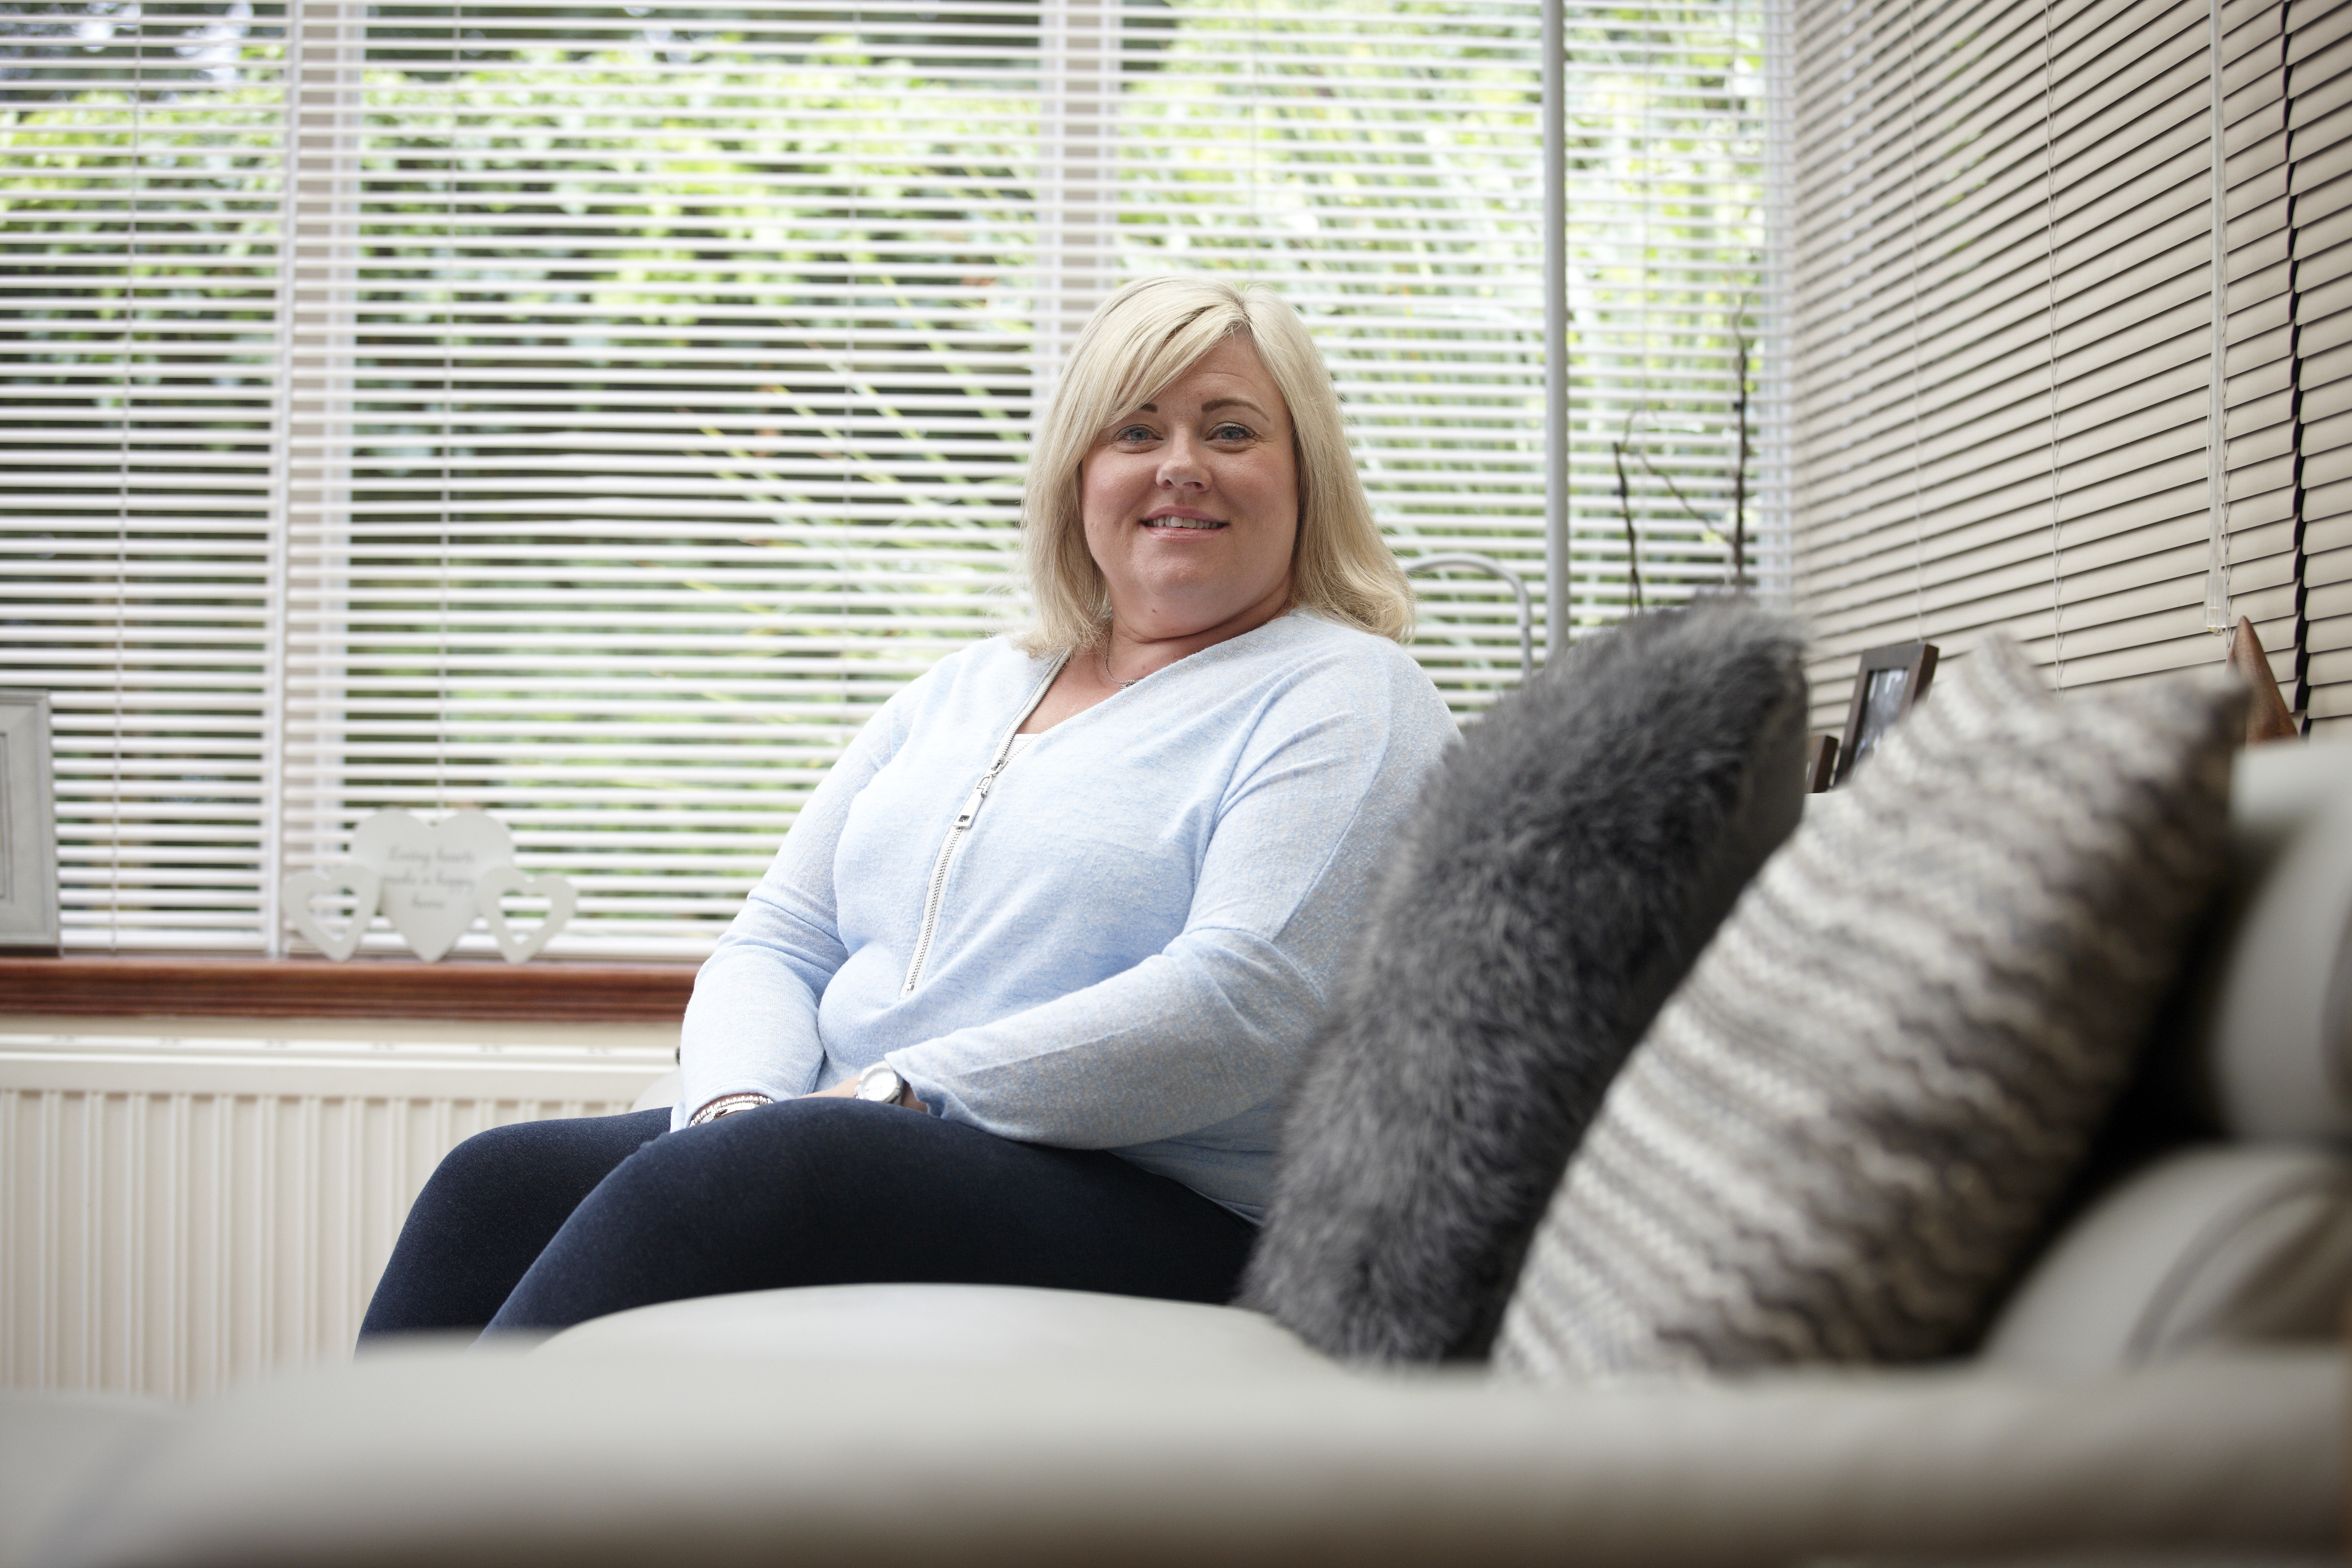 Sarah Thompson, Unite member who fought for compensation following unnecessary surgery, in her living room